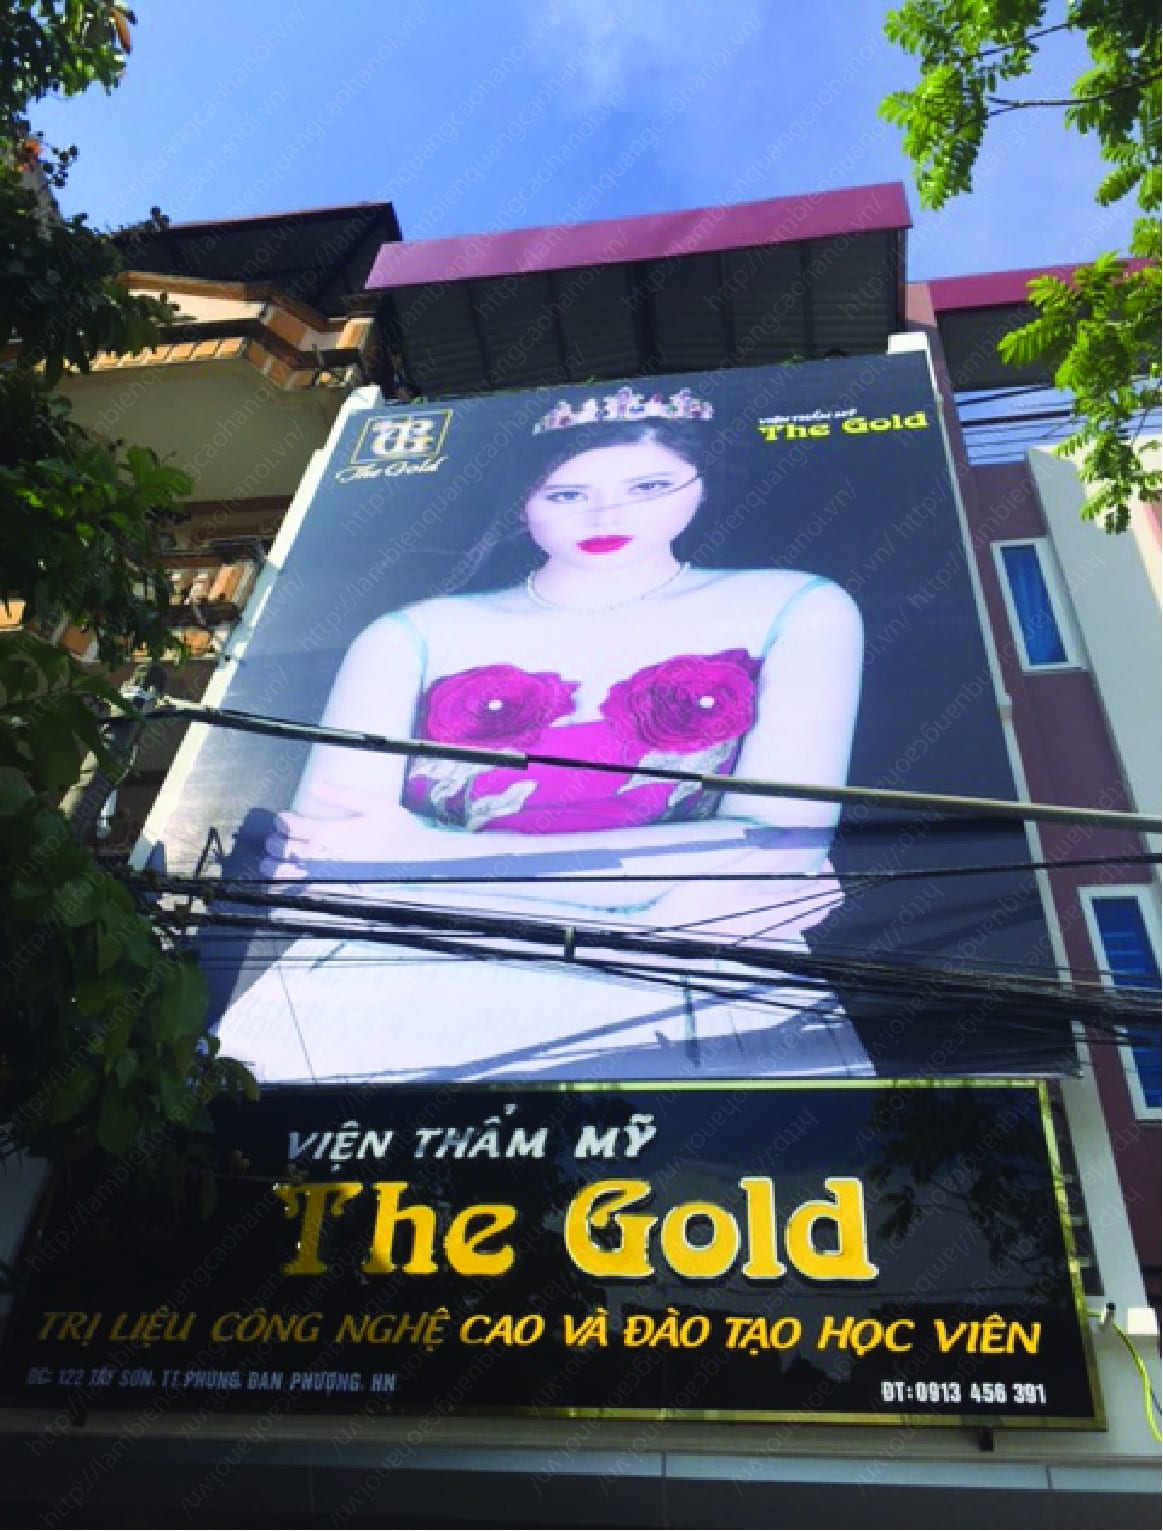 anh the gold-01 (1)